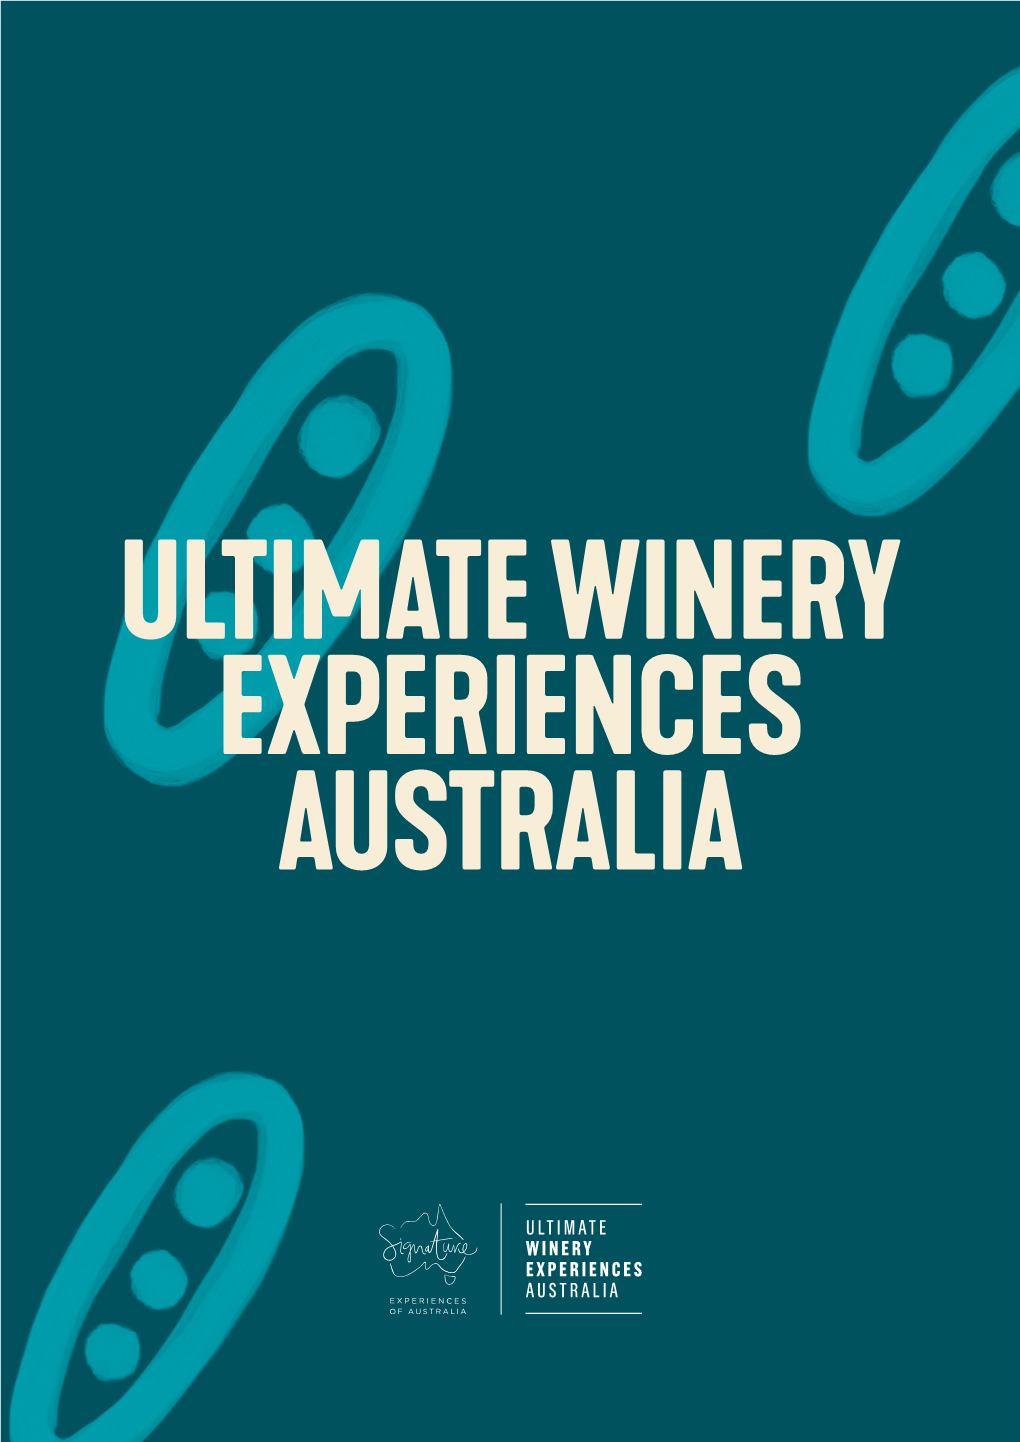 Ultimate Winery Experiences of Australia